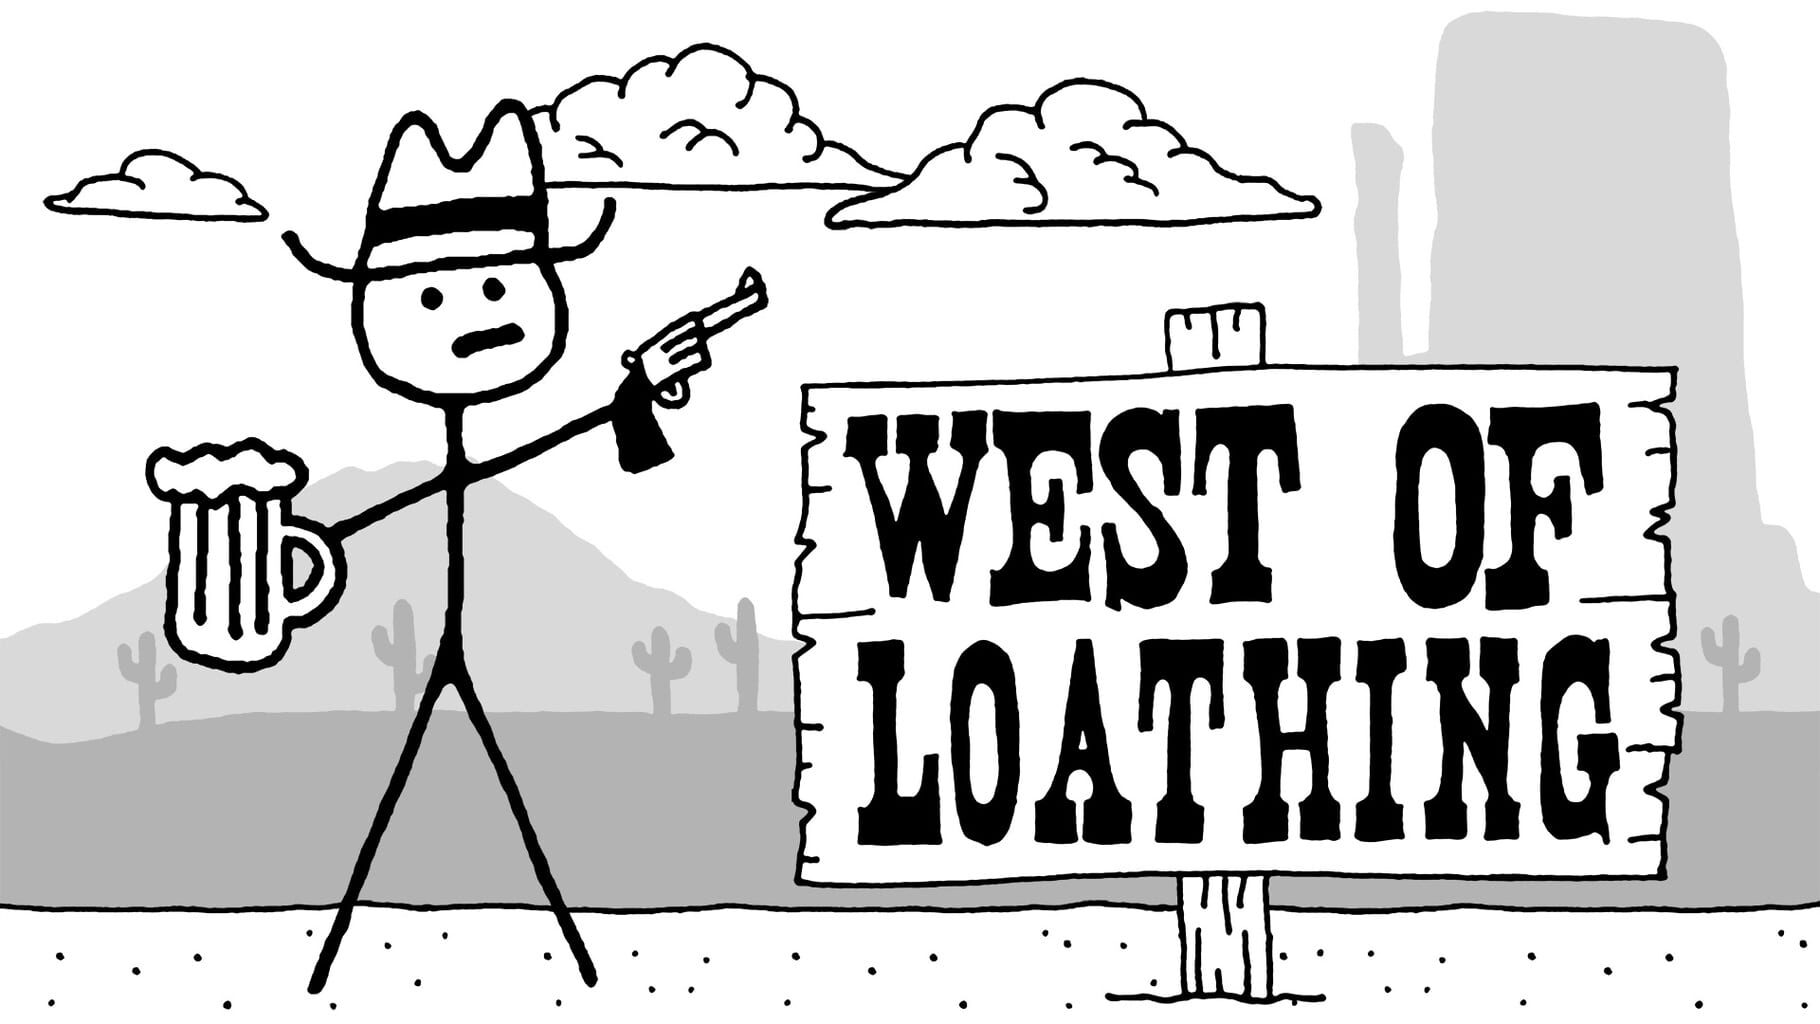 Artwork for West of Loathing